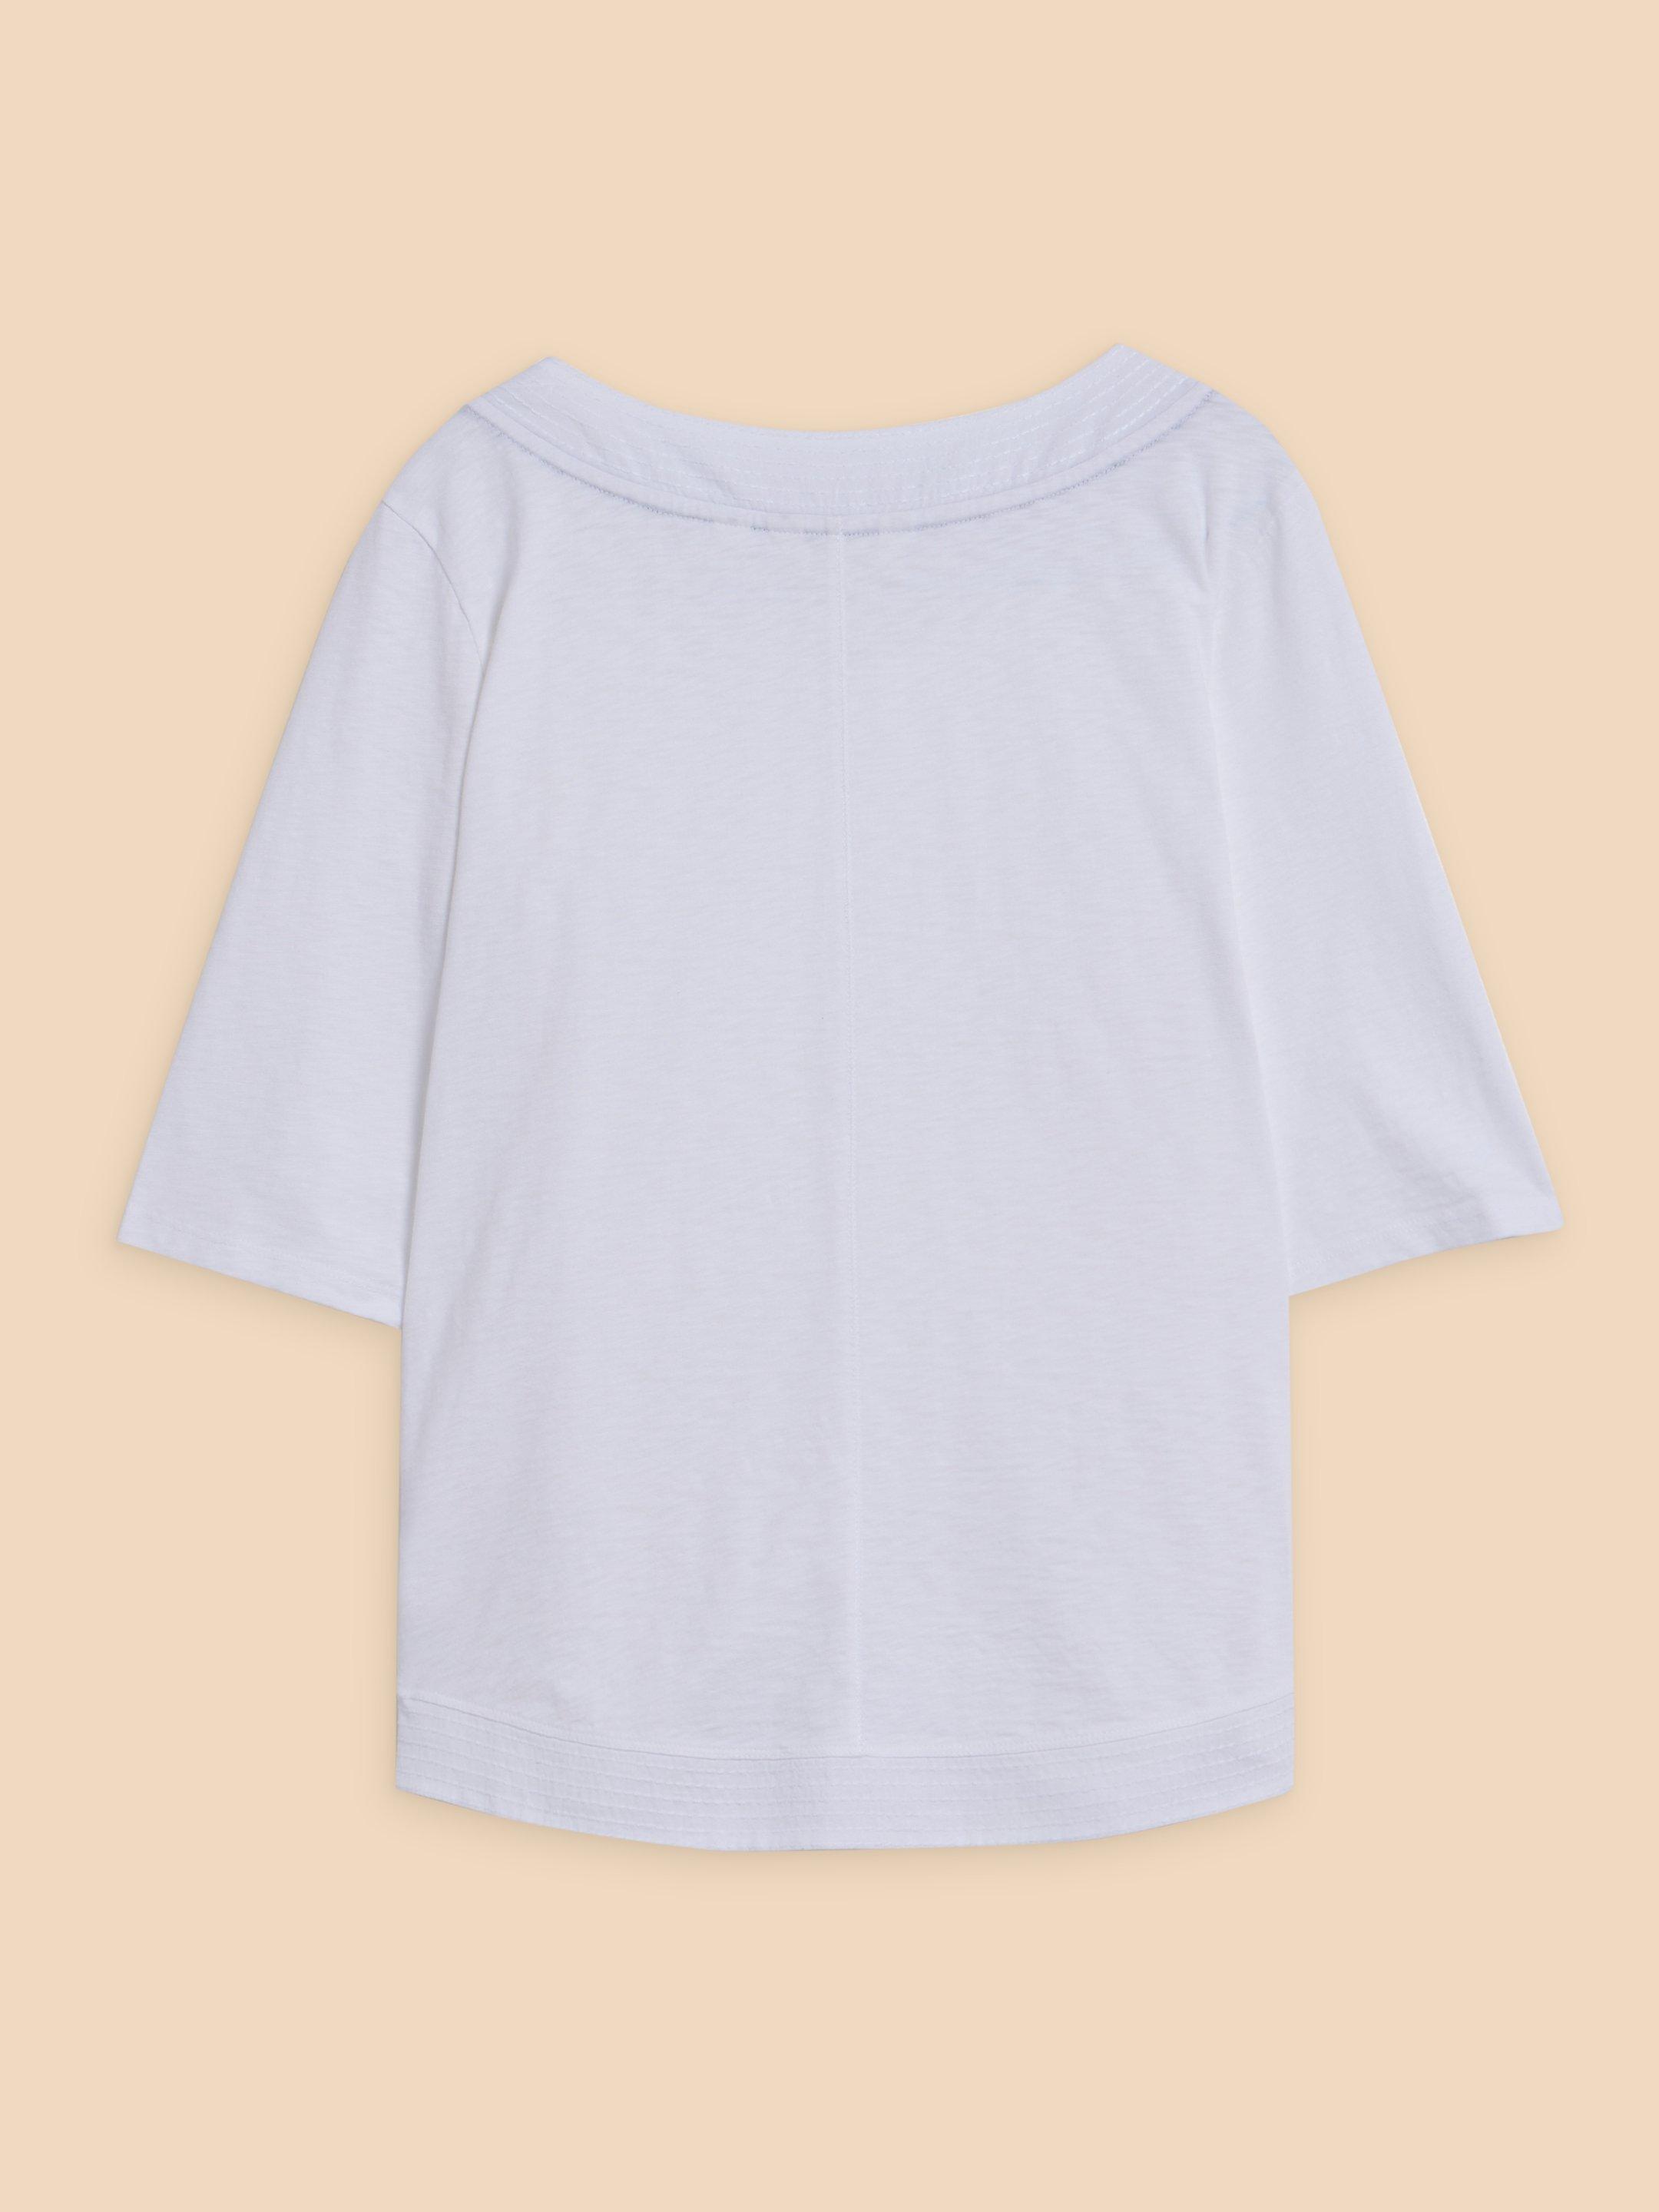 WEAVER EMBROIDERED TOP in BRIL WHITE - FLAT BACK